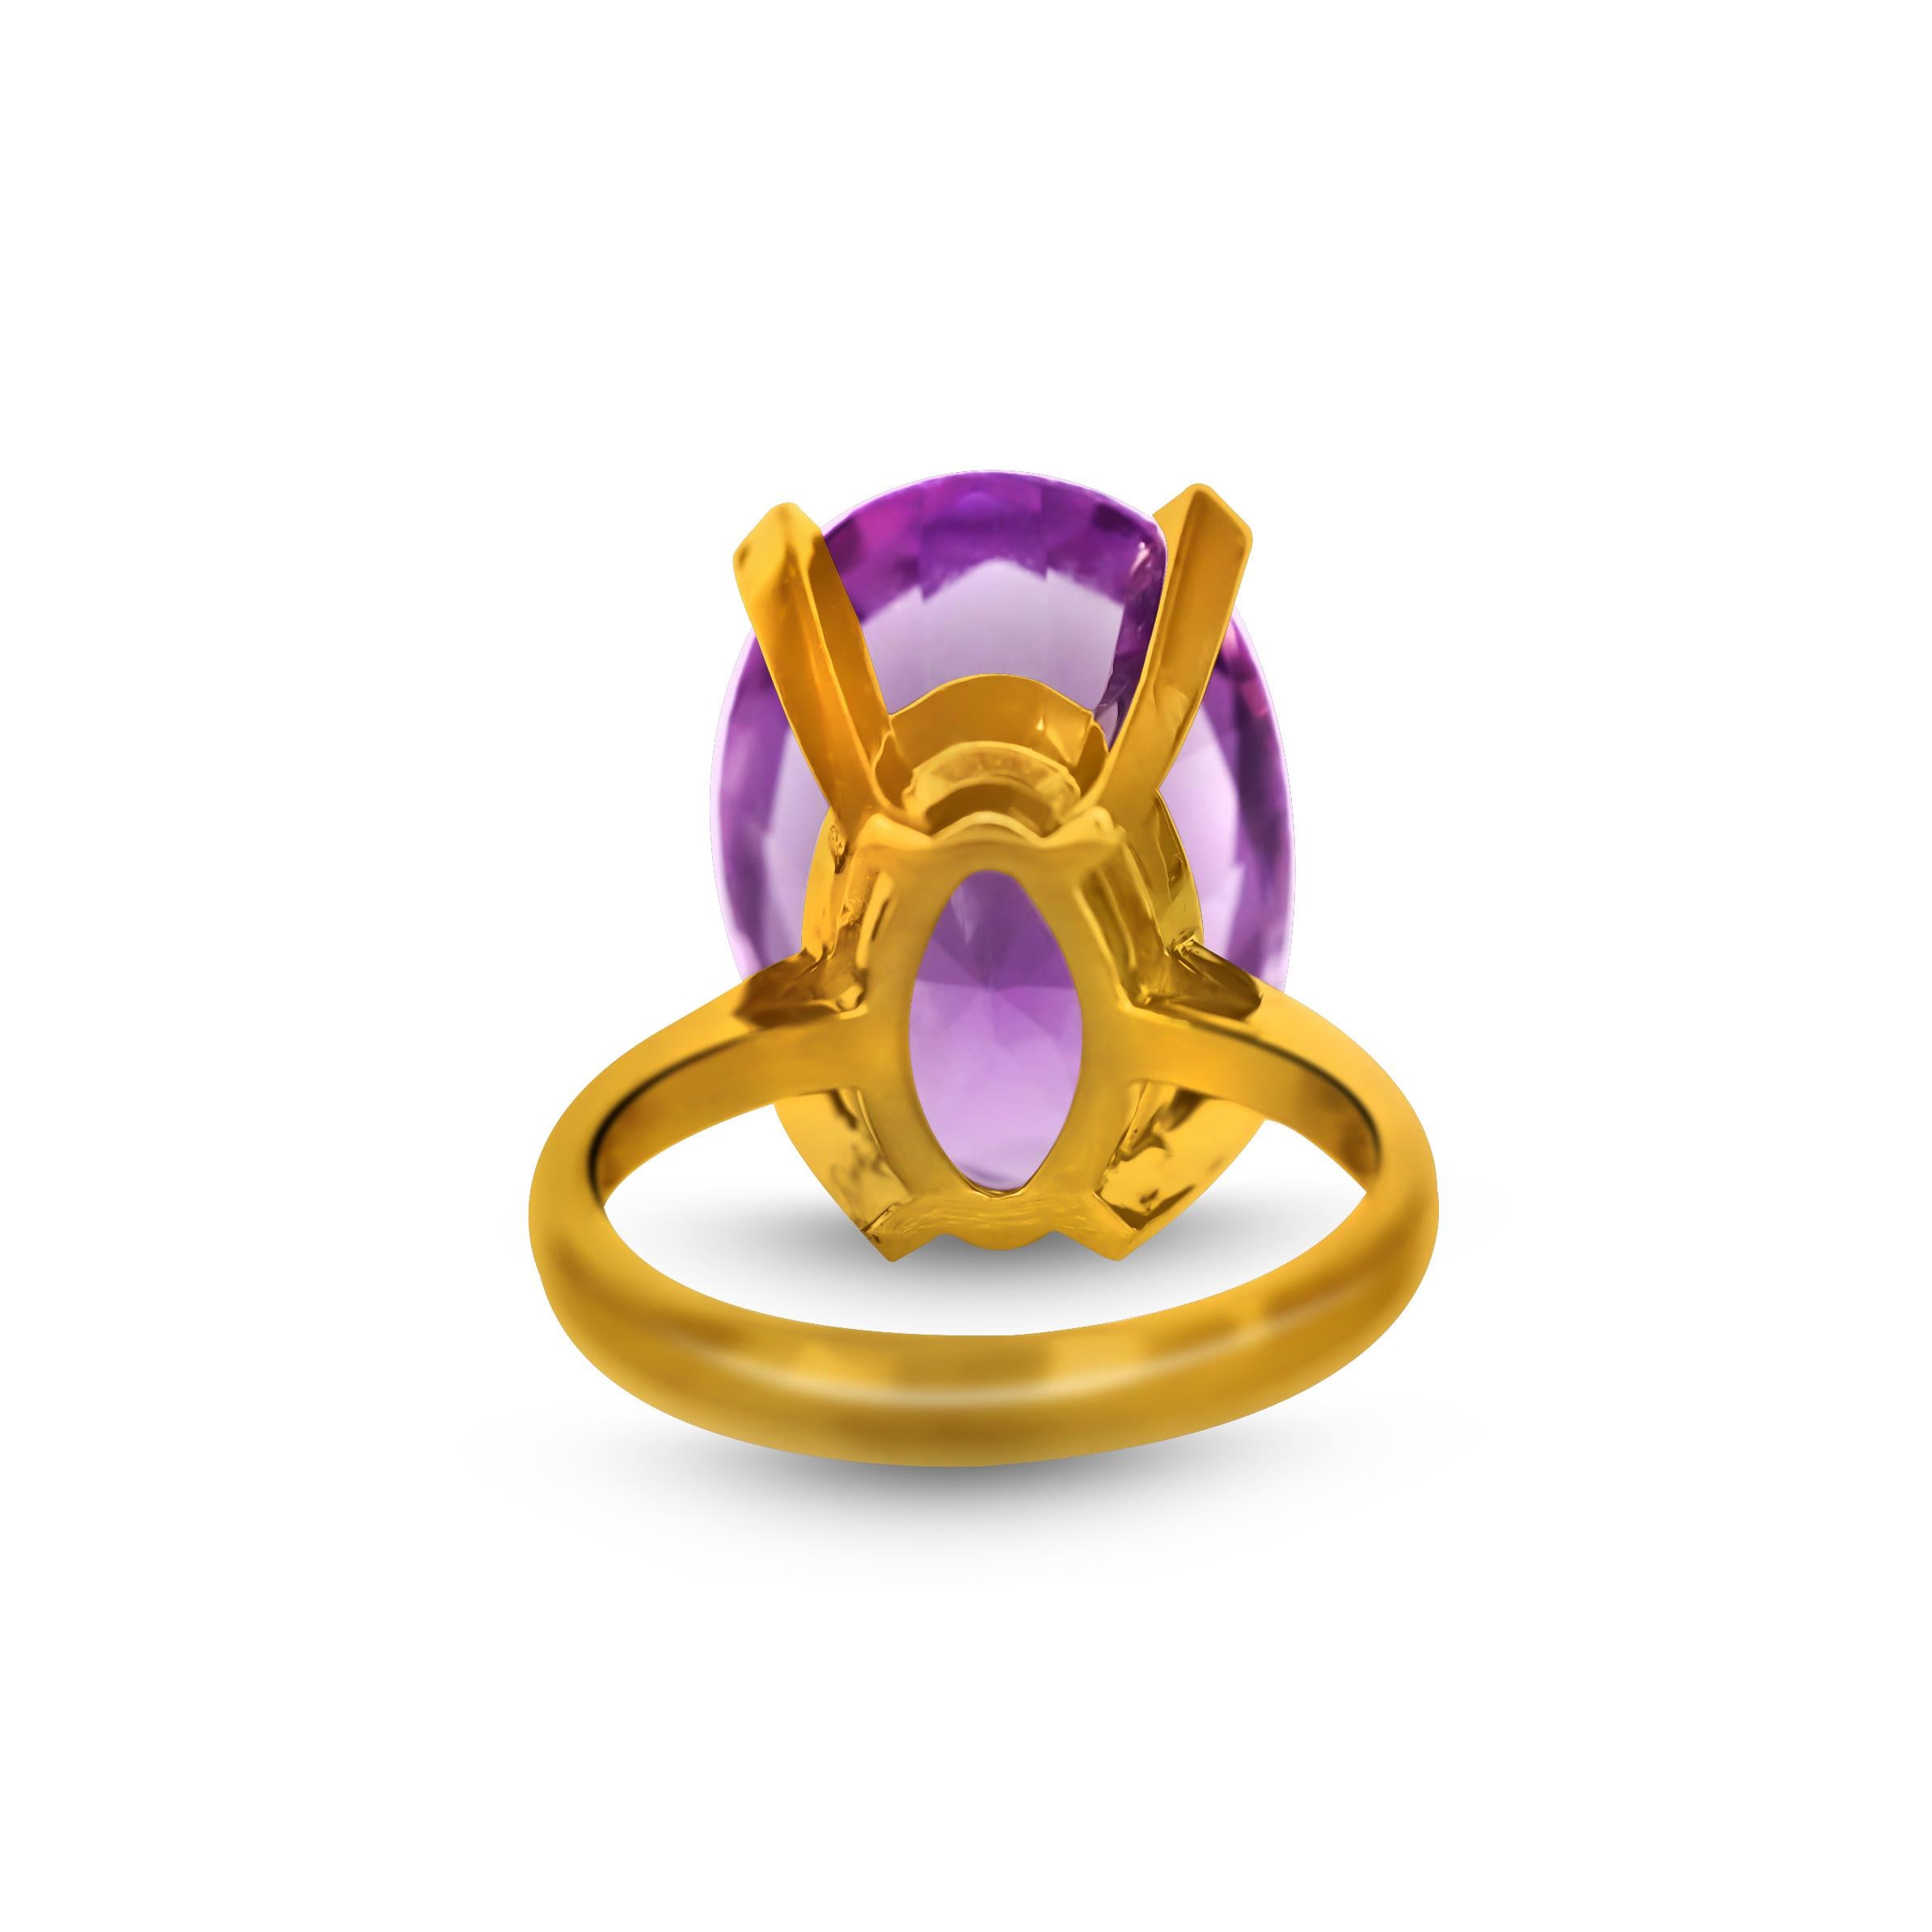 14K yellow gold ring with 5.0 ctw Purple amethyst center stone. 
Amethyst size: 16.87 mm long, 11.86 mm wide.
Clarity: eye clean. 
Carat: 5.0
Total weight: 5.54 grams.

